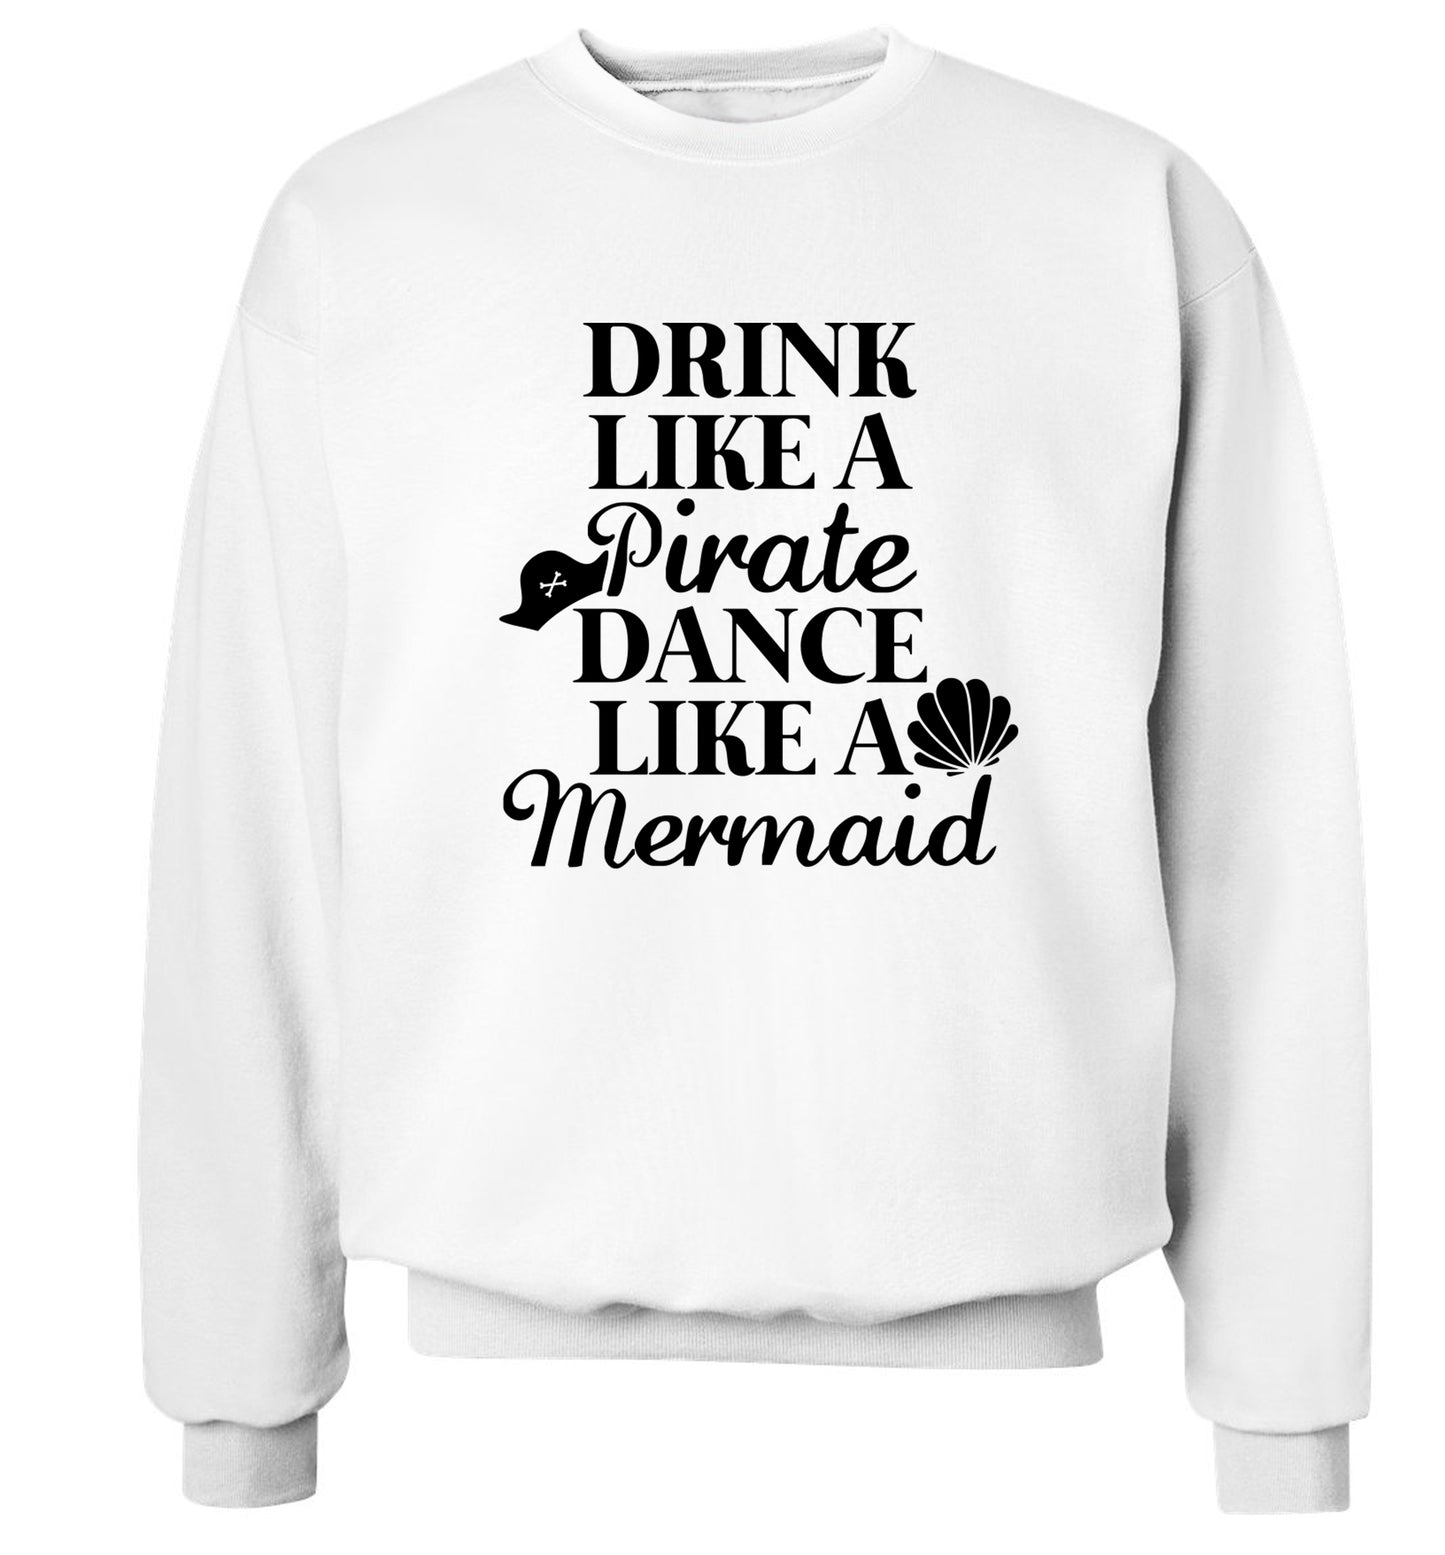 Drink like a pirate dance like a mermaid Adult's unisex white Sweater 2XL